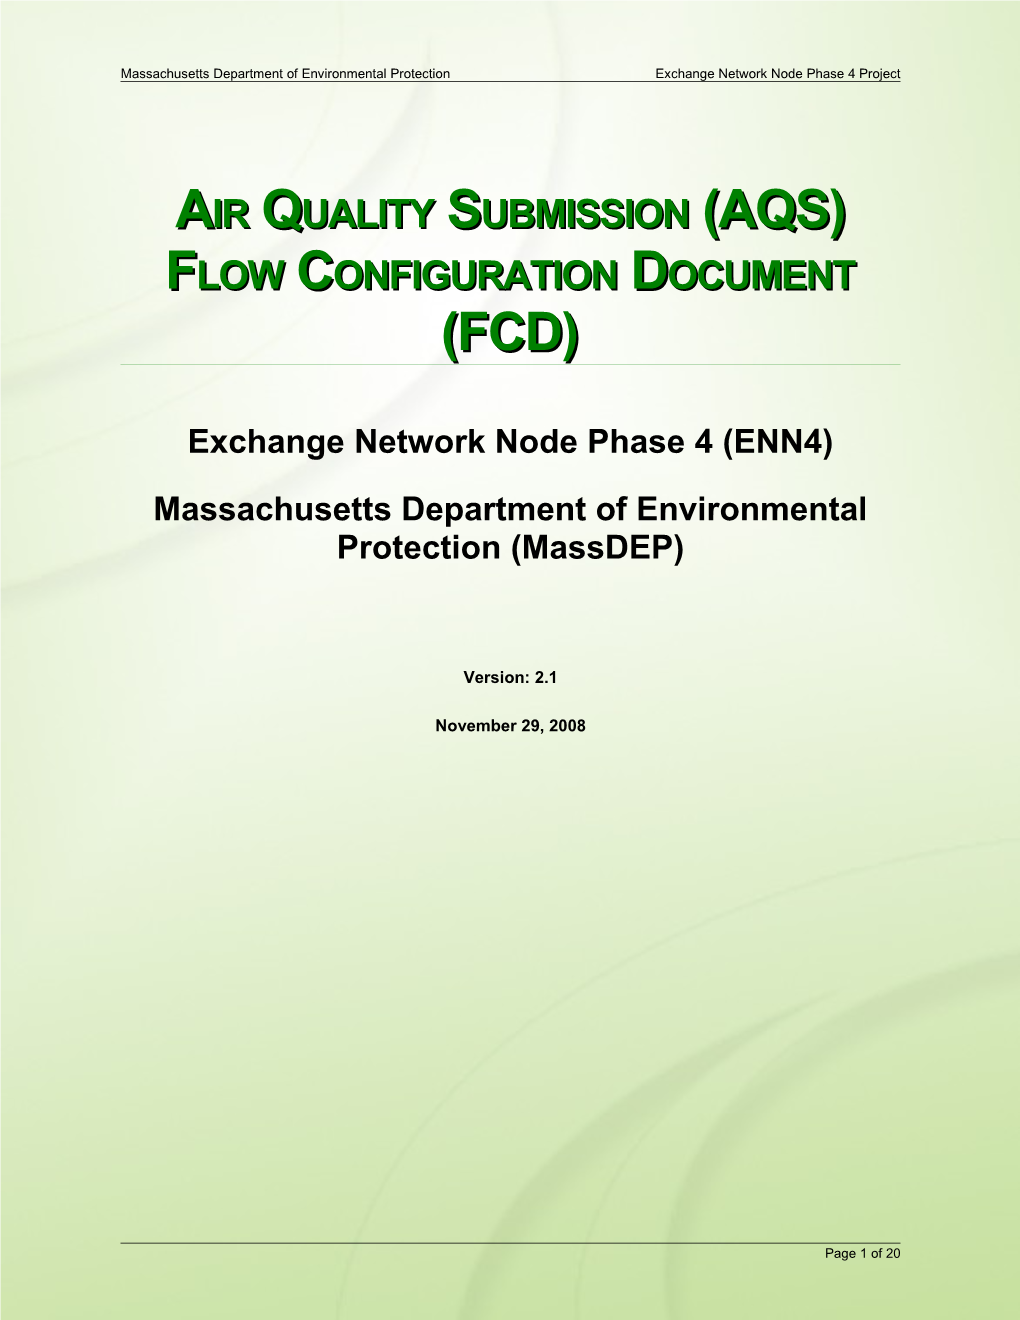 Air Quality Submission (AQS) Flow Configuration Document (FCD)